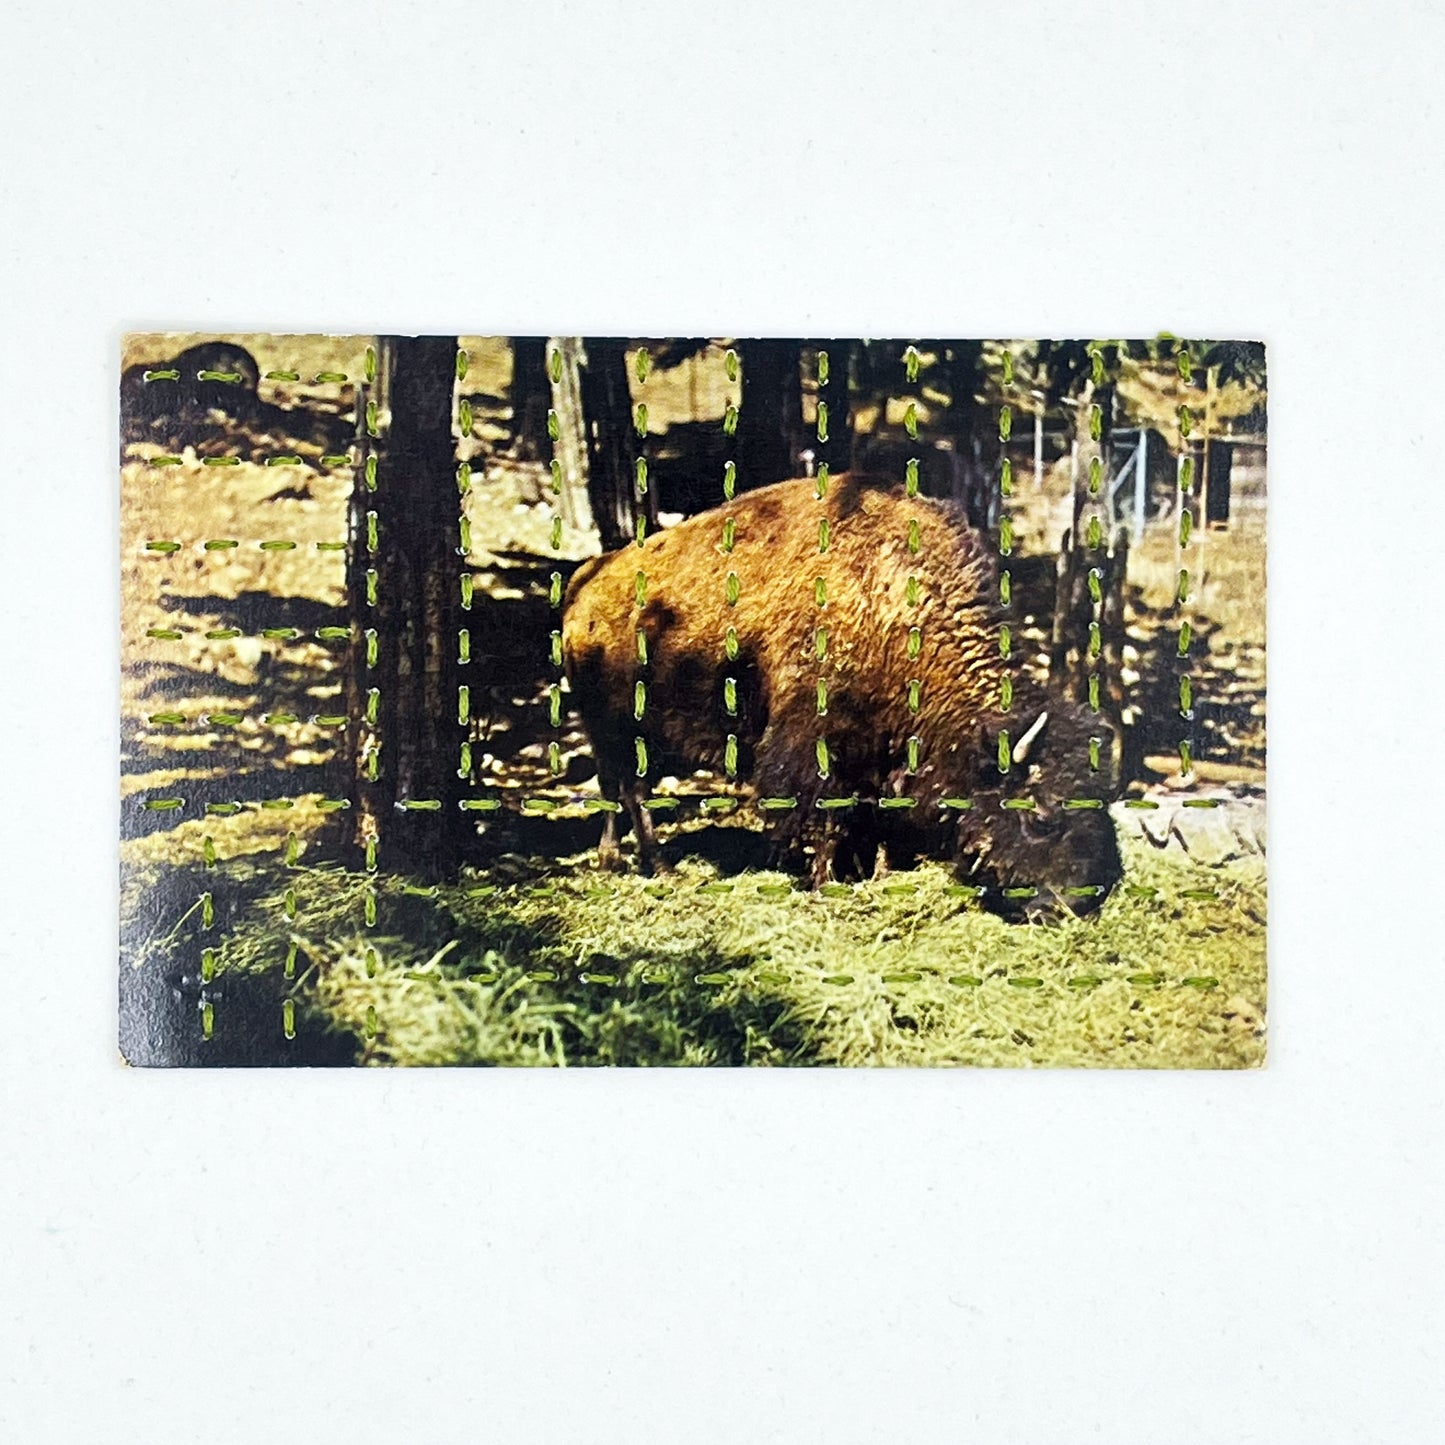 vintage postcard of a buffalo grazing in a forest, hand stitched with pine green thread in a basketweave pattern